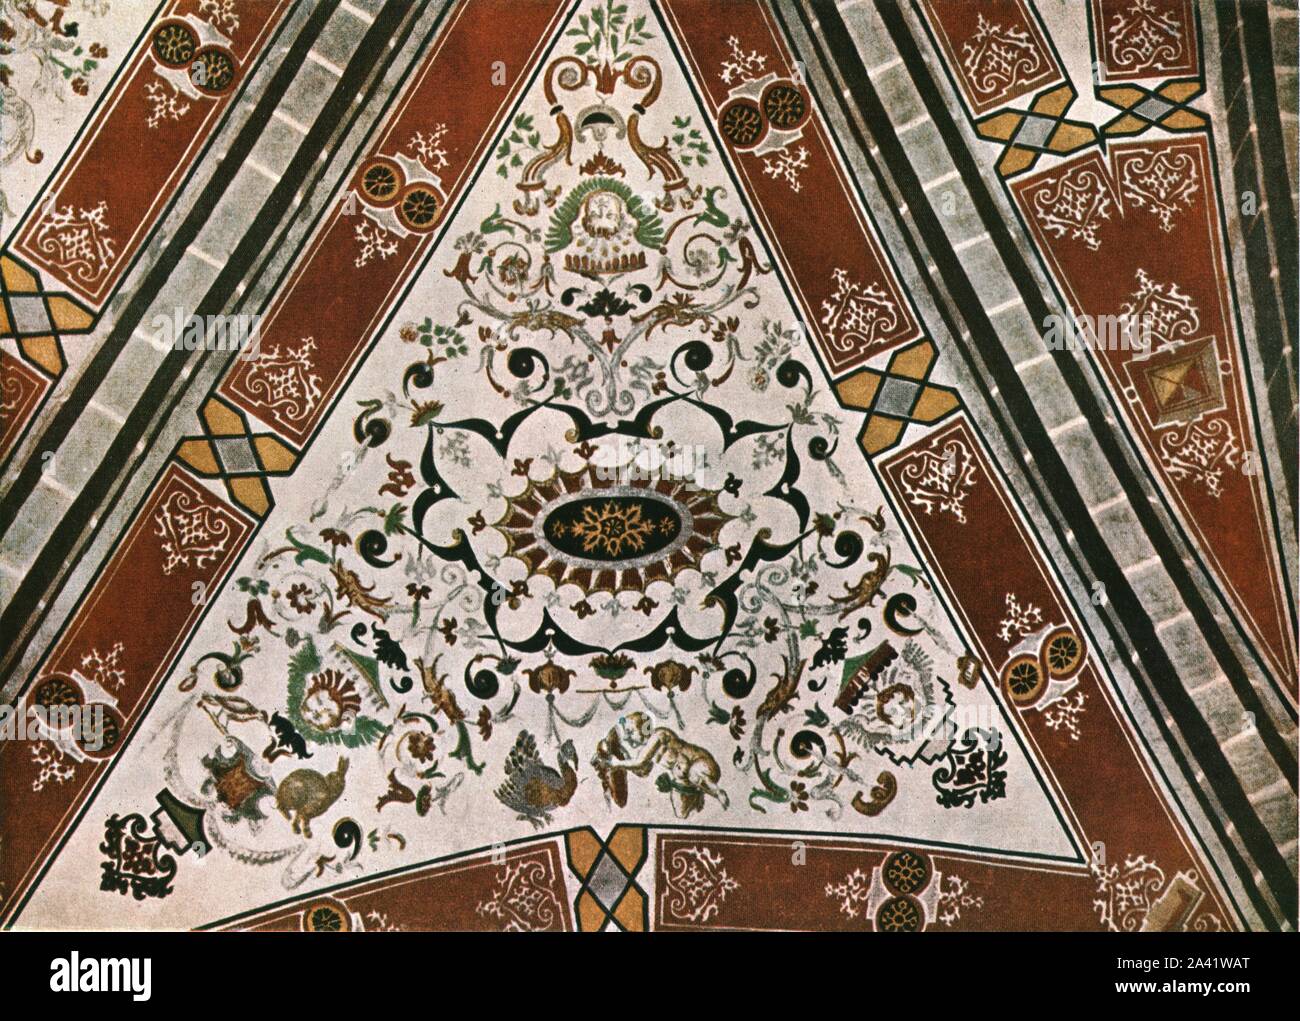 Decoration in the Church of Saint-Martin, Lutry, Vaud, Switzerland, (1928). '1577....Painting on the vaulting surface of the nave of the church at Lutry. Painted by Master Humbert Mareschet'. After V. A. Bourgeois. Plate LXXXVIII, fig 178, from &quot;An Encyclopaedia of Colour Decoration from the Earliest Times to the Middle of the XIXth Century&quot; with explanatory text by Helmuth Bossert. [Ernst Wasmuth Ltd., Berlin, 1928] Stock Photo